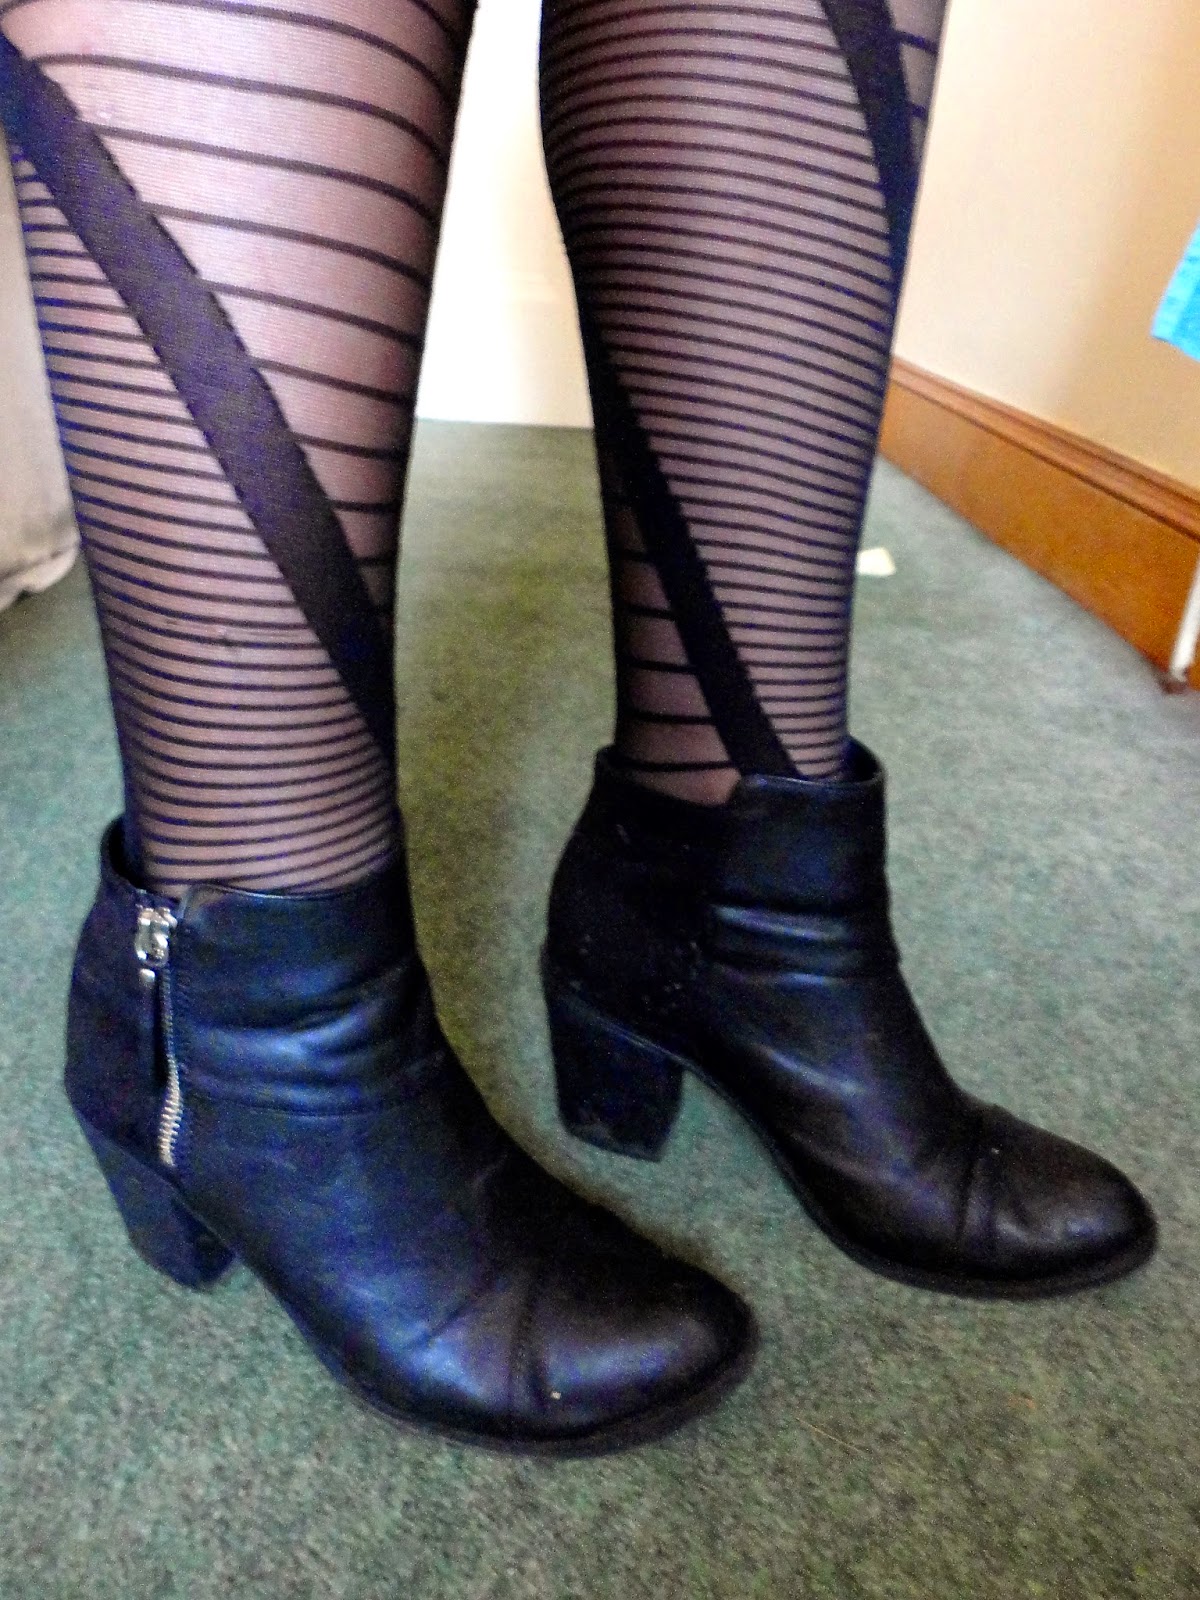 black high heel ankle boots with irregular striped tights